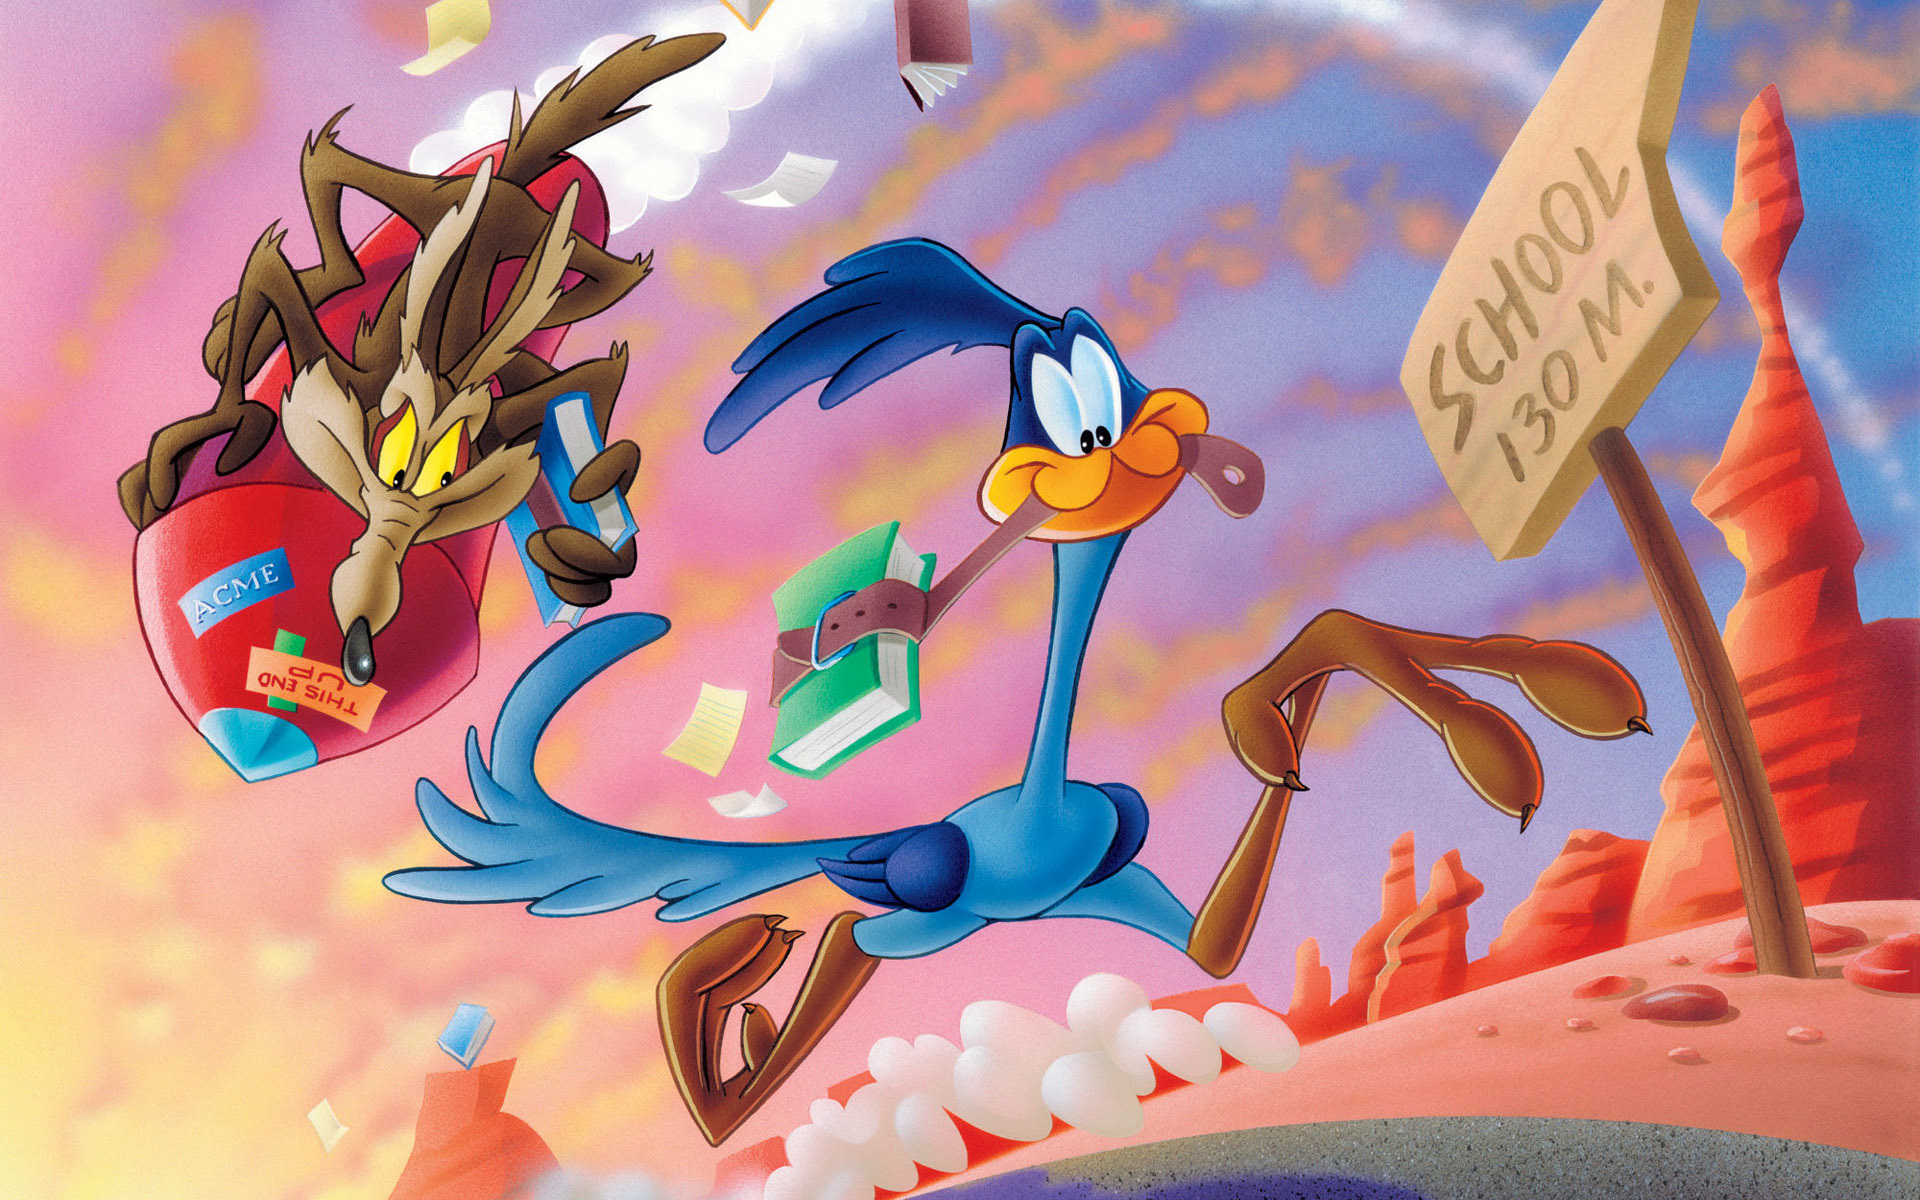 Amazing Road Runner And Wile E. Coyote Pictures & Backgrounds